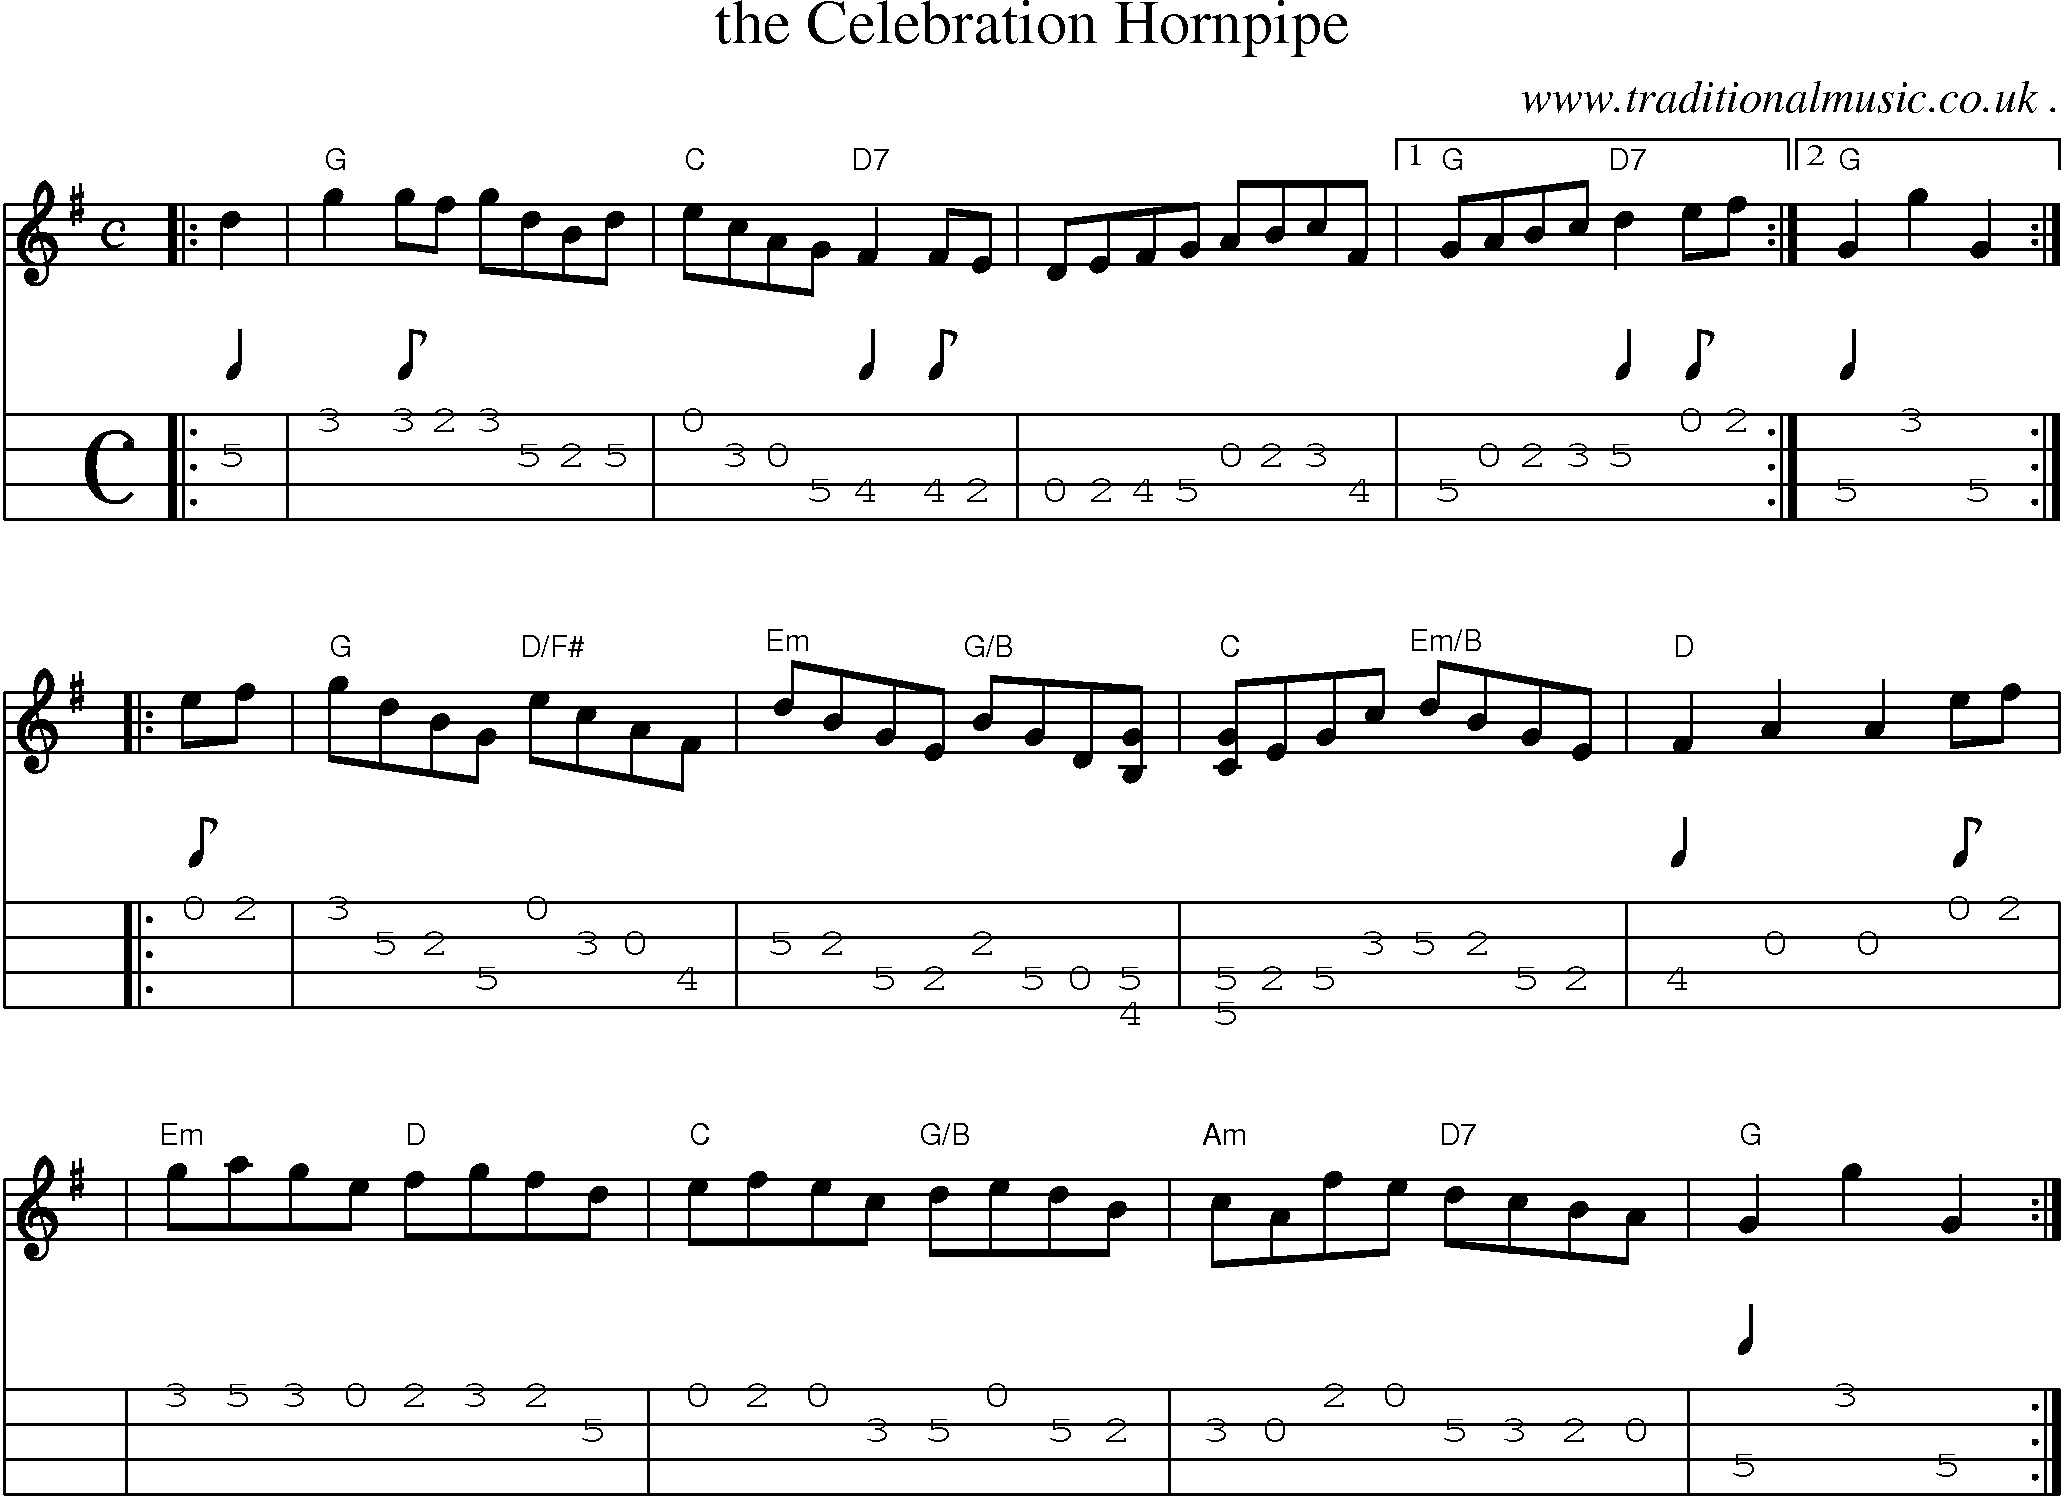 Sheet-music  score, Chords and Mandolin Tabs for The Celebration Hornpipe